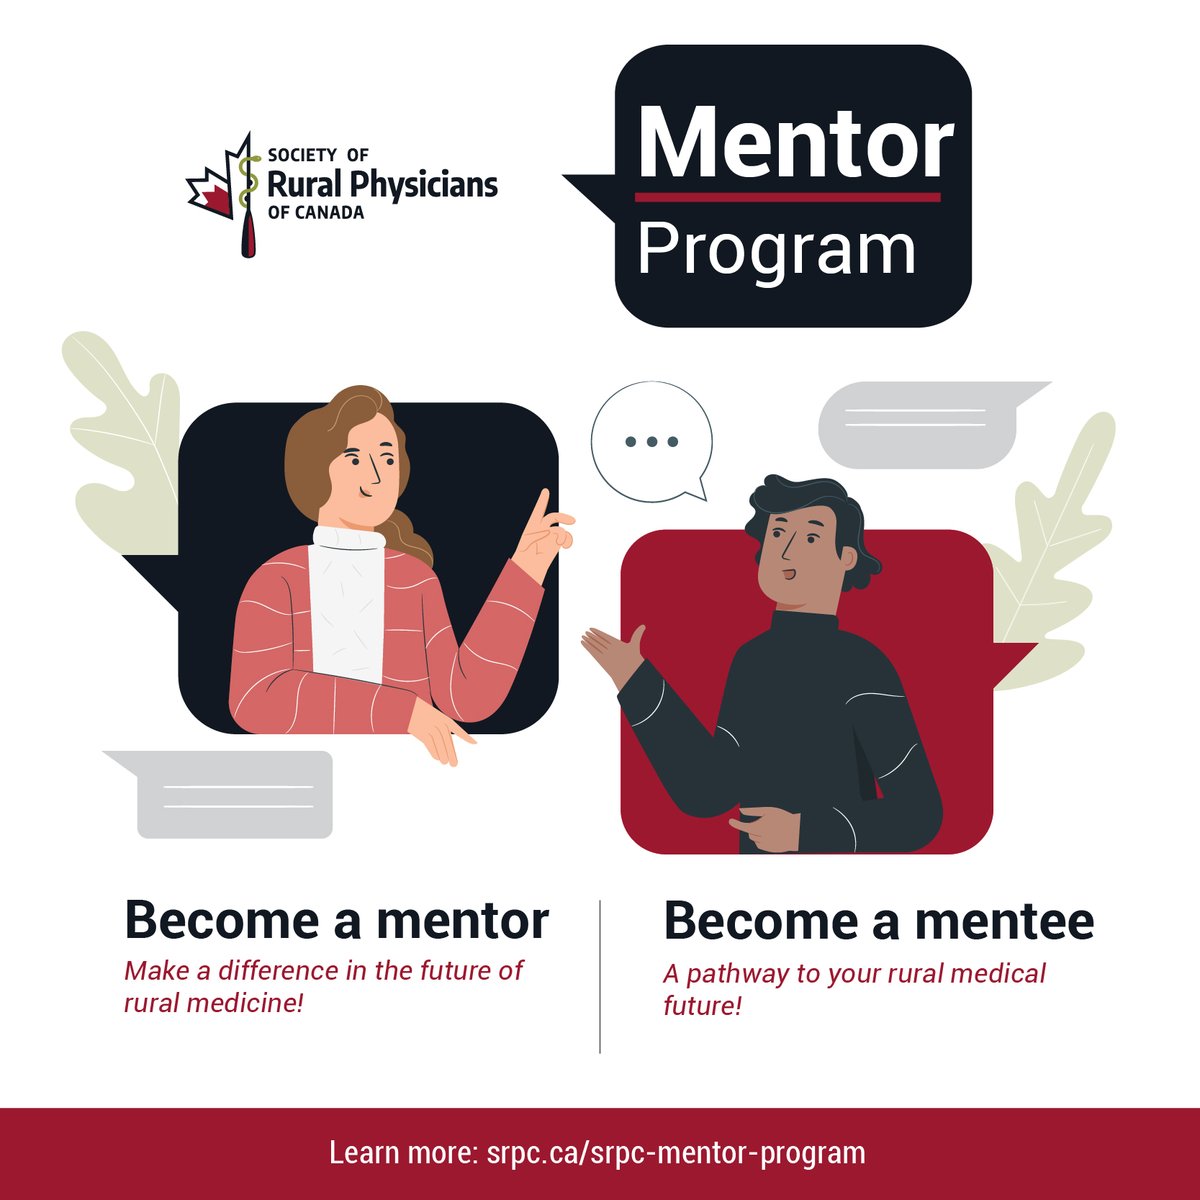 Join the SRPC Mentor Program! Become a mentor and inspire the next generation of rural physicians, or become a mentee and receive invaluable knowledge to shape your future career as a rural healthcare provider. Learn more: srpc.ca/SRPC-Mentor-Pr… @srpc_residents @students_srpc